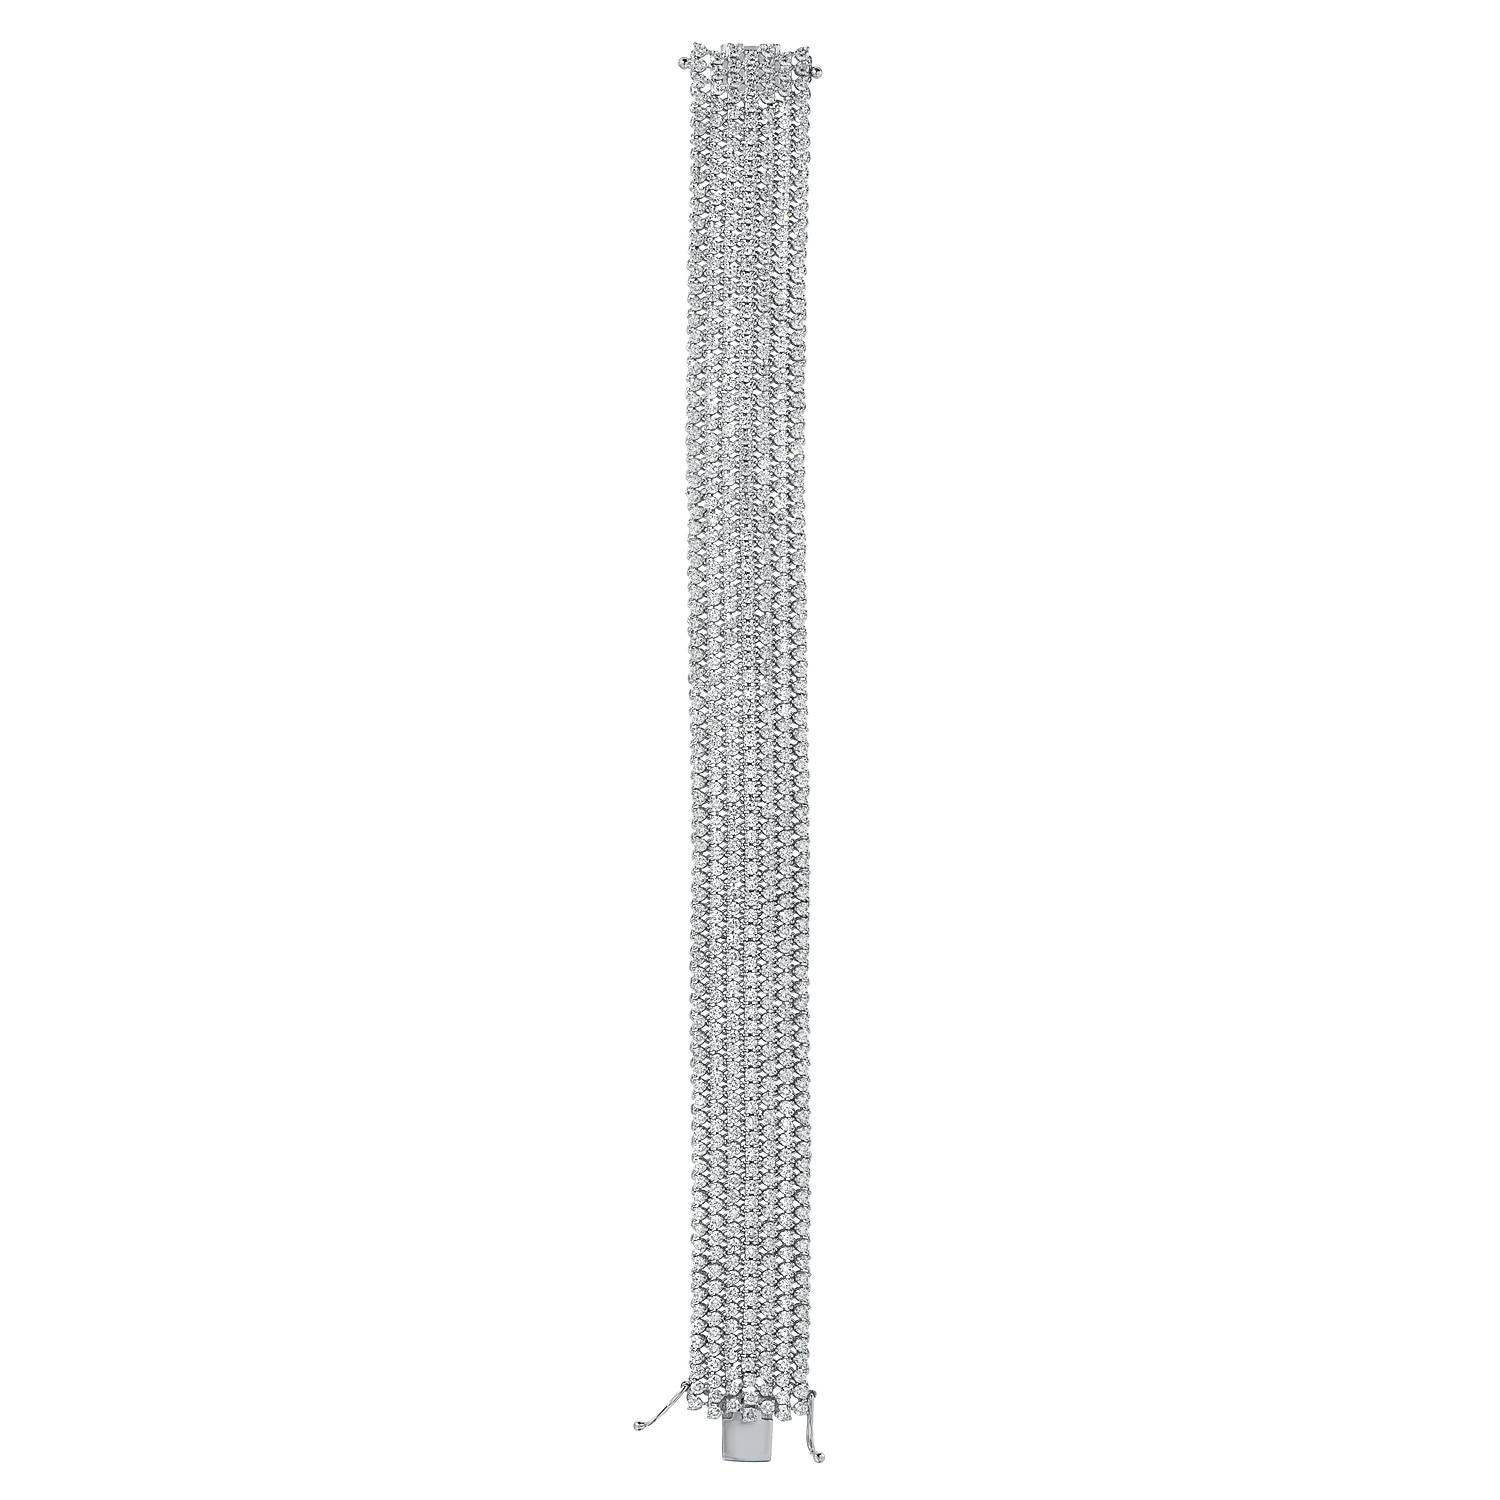 Diamond bracelet comprised of 602 round brilliant diamonds weighing a total of 13 carats, remarkably hand set in this 18K white gold, completely flexible, mesh diamond bracelet.
Diamond bracelet total length - 7 inches.
Diamond bracelet total width